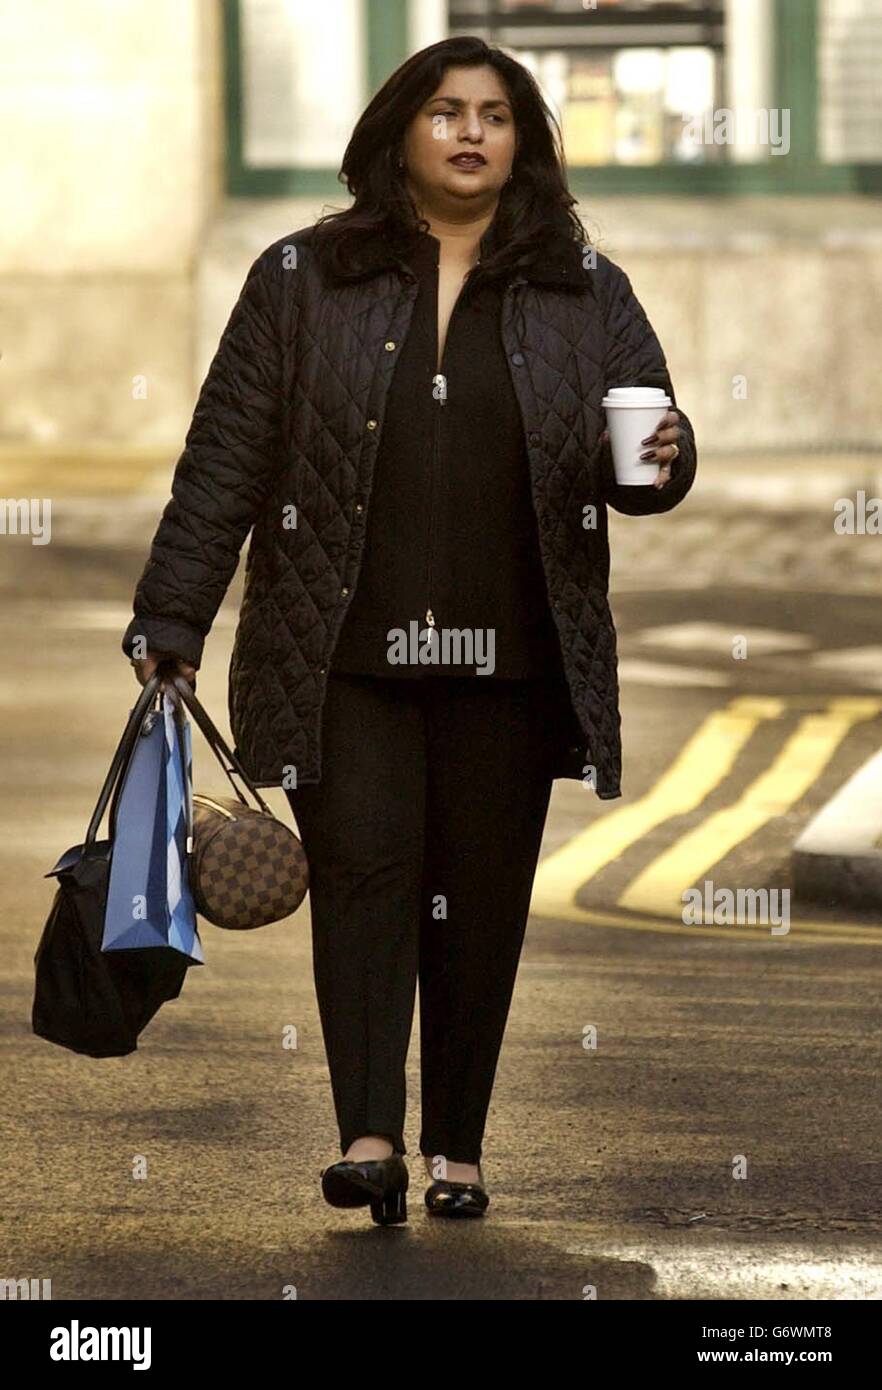 Joyti De-Laurey, who is accused of fleecing a 4.5 million fortune from her bosses, arrives at Southwark Crown Court in Central London as the jury continues to consider its verdict. The six-man, six-woman panel has heard that city secretary De-Laurey, 35, used her allegedly ill-gotten gains for 'astonishing' spending sprees on jewellery, designer clothes, fast cars and properties in this country and abroad. Stock Photo